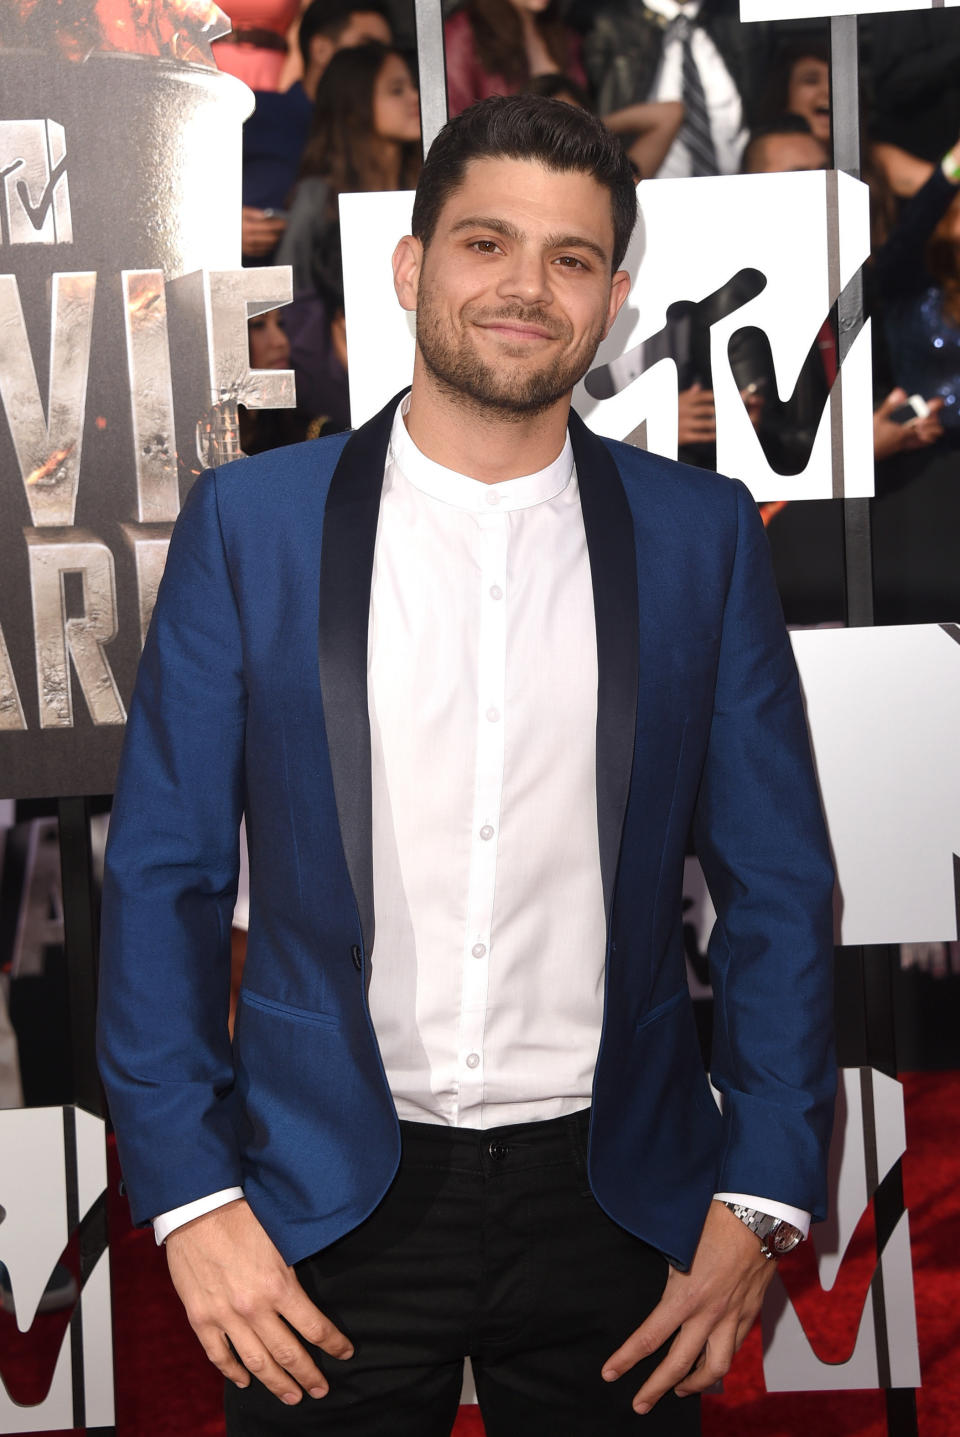 Ferrara attends the 2014 MTV Movie Awards at Nokia Theatre L.A. Live on April 13, 2014 in Los Angeles, California.